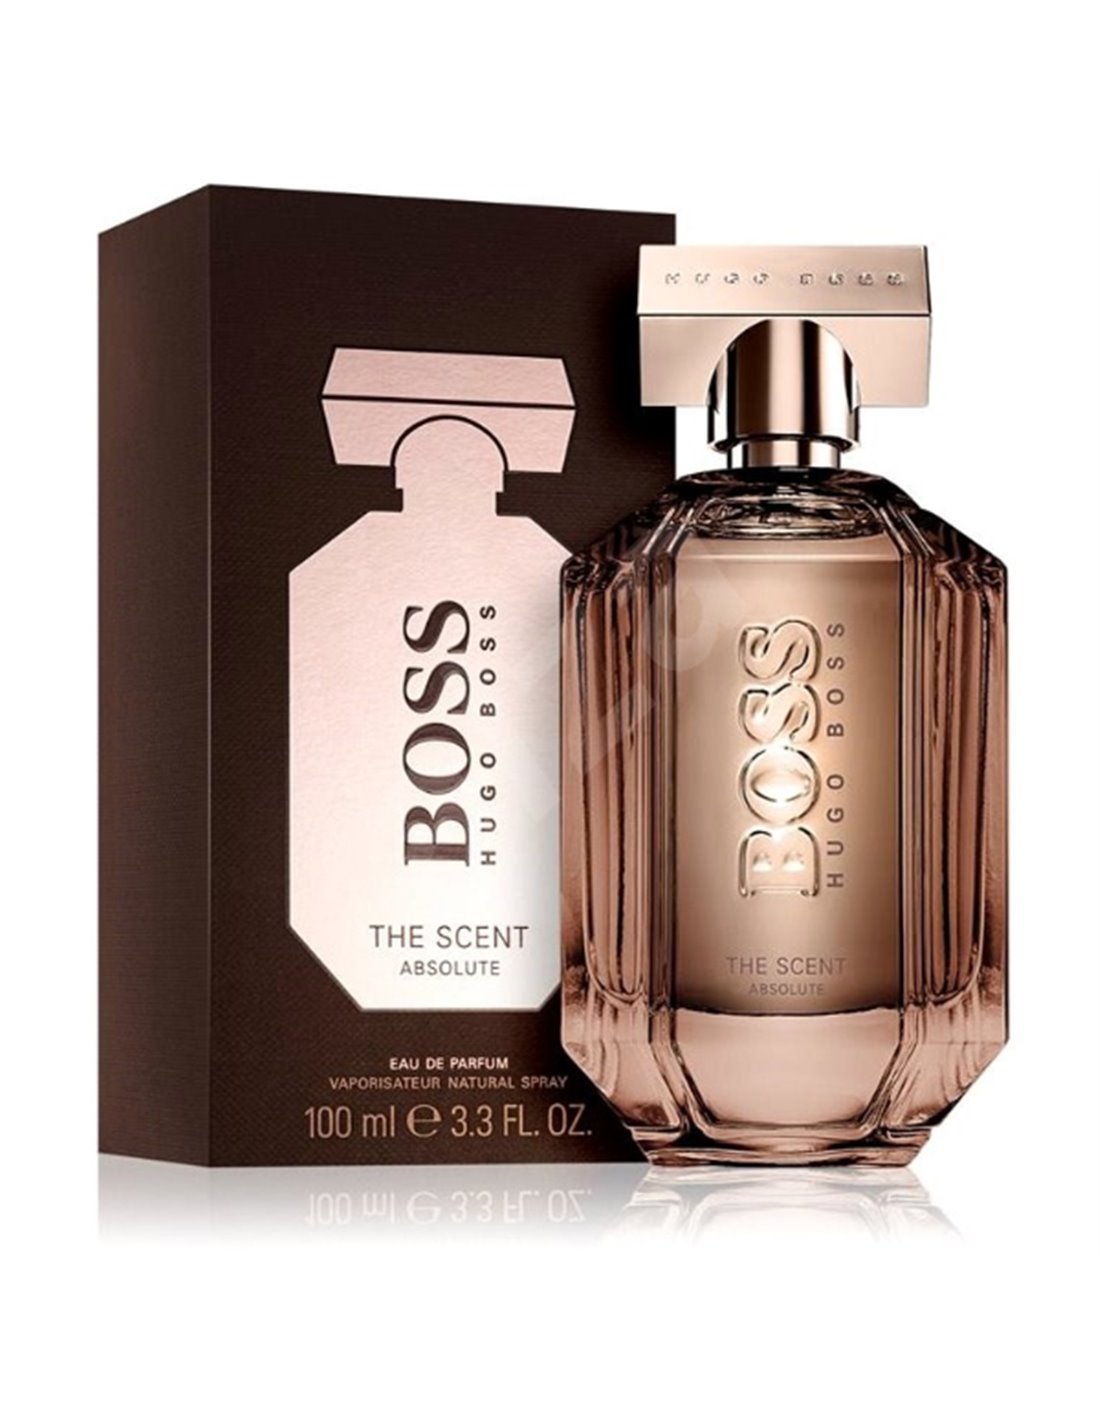 Хуго босс отзывы. Hugo Boss the Scent absolute 100ml. Hugo Boss the Scent le Parfum. Hugo Boss the Scent le Parfum 100 ml. Hugo Boss the Scent for her 100 ml.